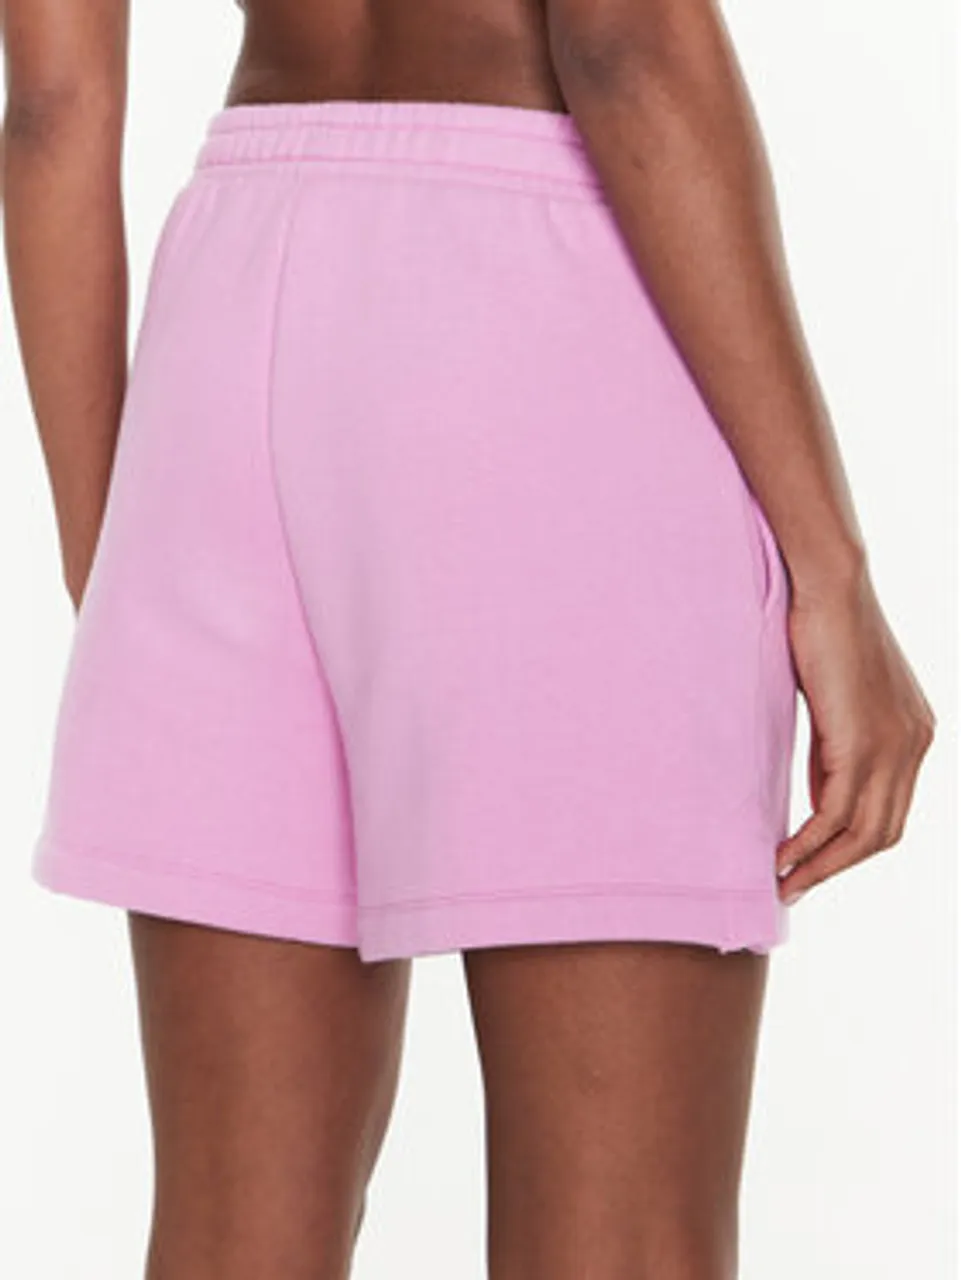 Vans Sportshorts Comfycush VN0A4POC Rosa Relaxed Fit